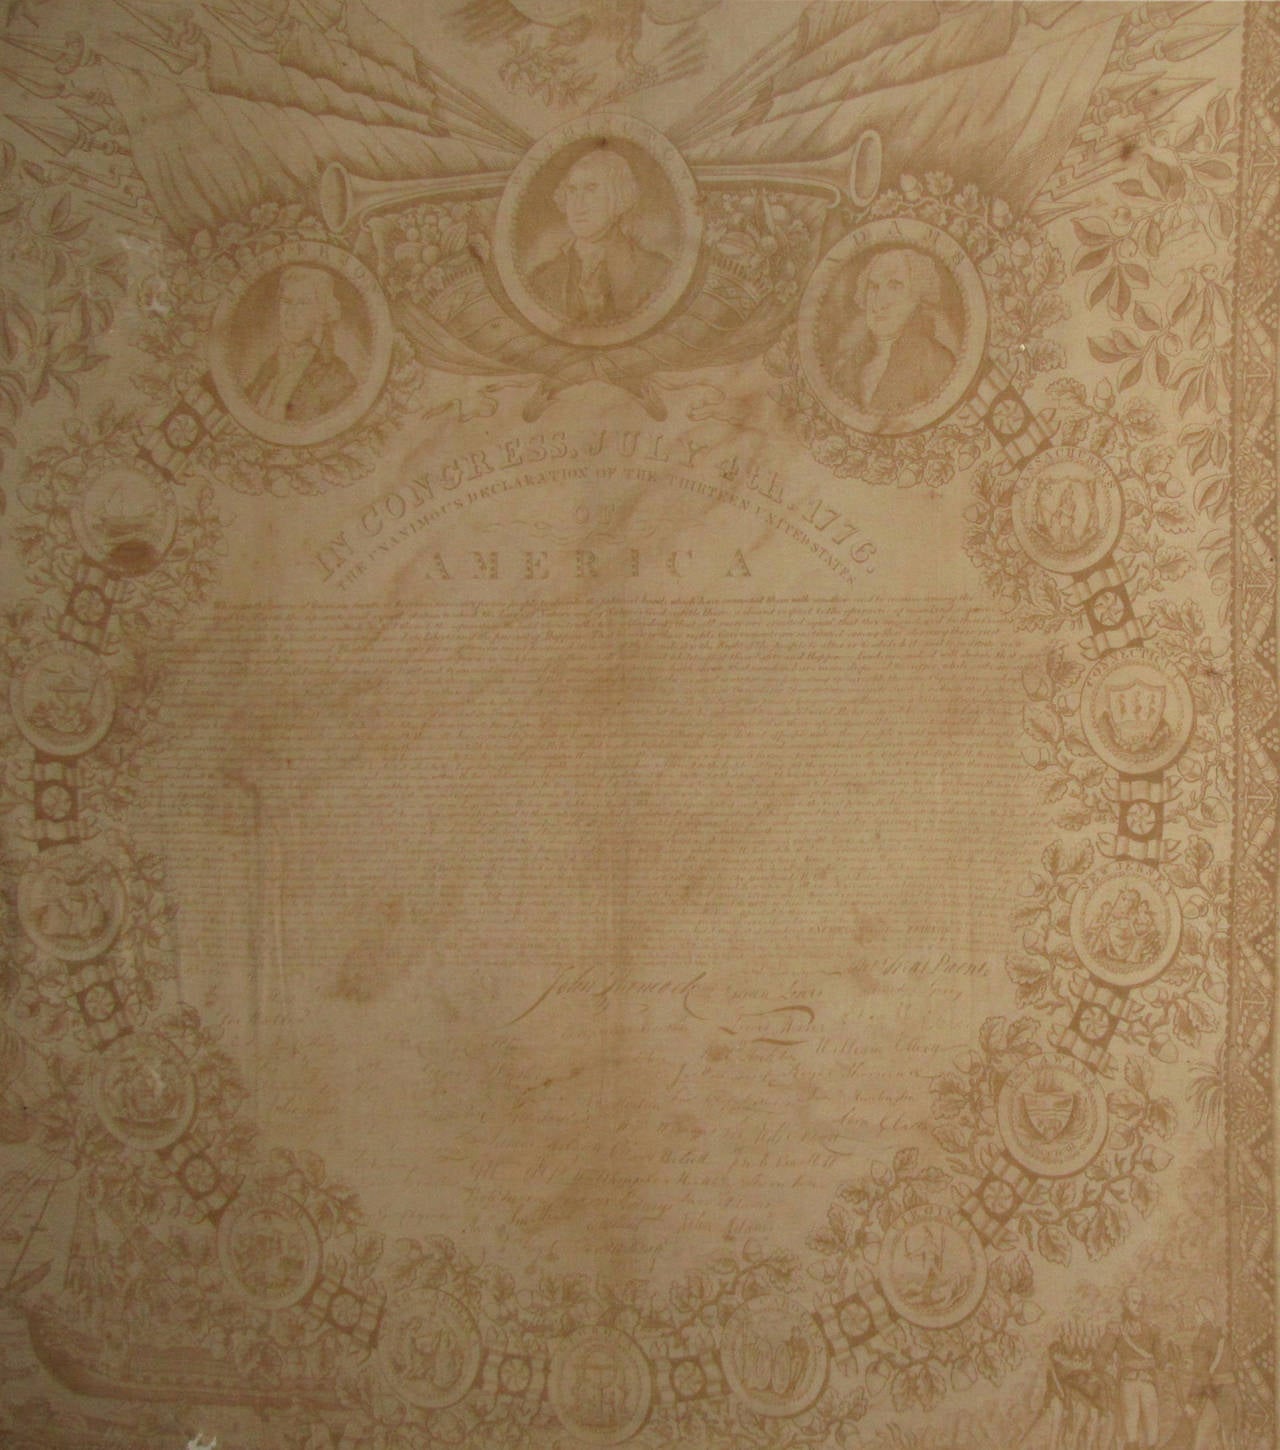 Rare 1819 Elaborate Declaration of Independence Textile with Founding Fathers featured

 Early 1819 Declaration of Independence on cloth with the text and signers signatures filling the center oval of the piece. Surrounded by detailed oval